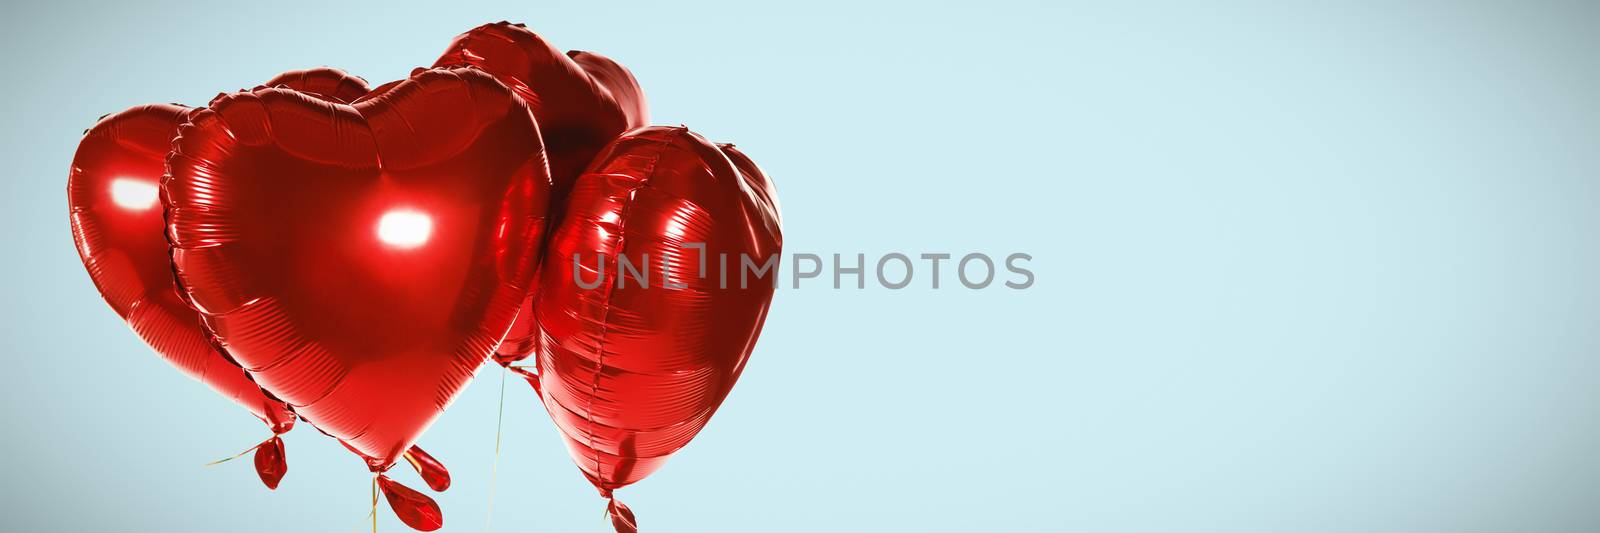 Red heart shape balloons against blue background